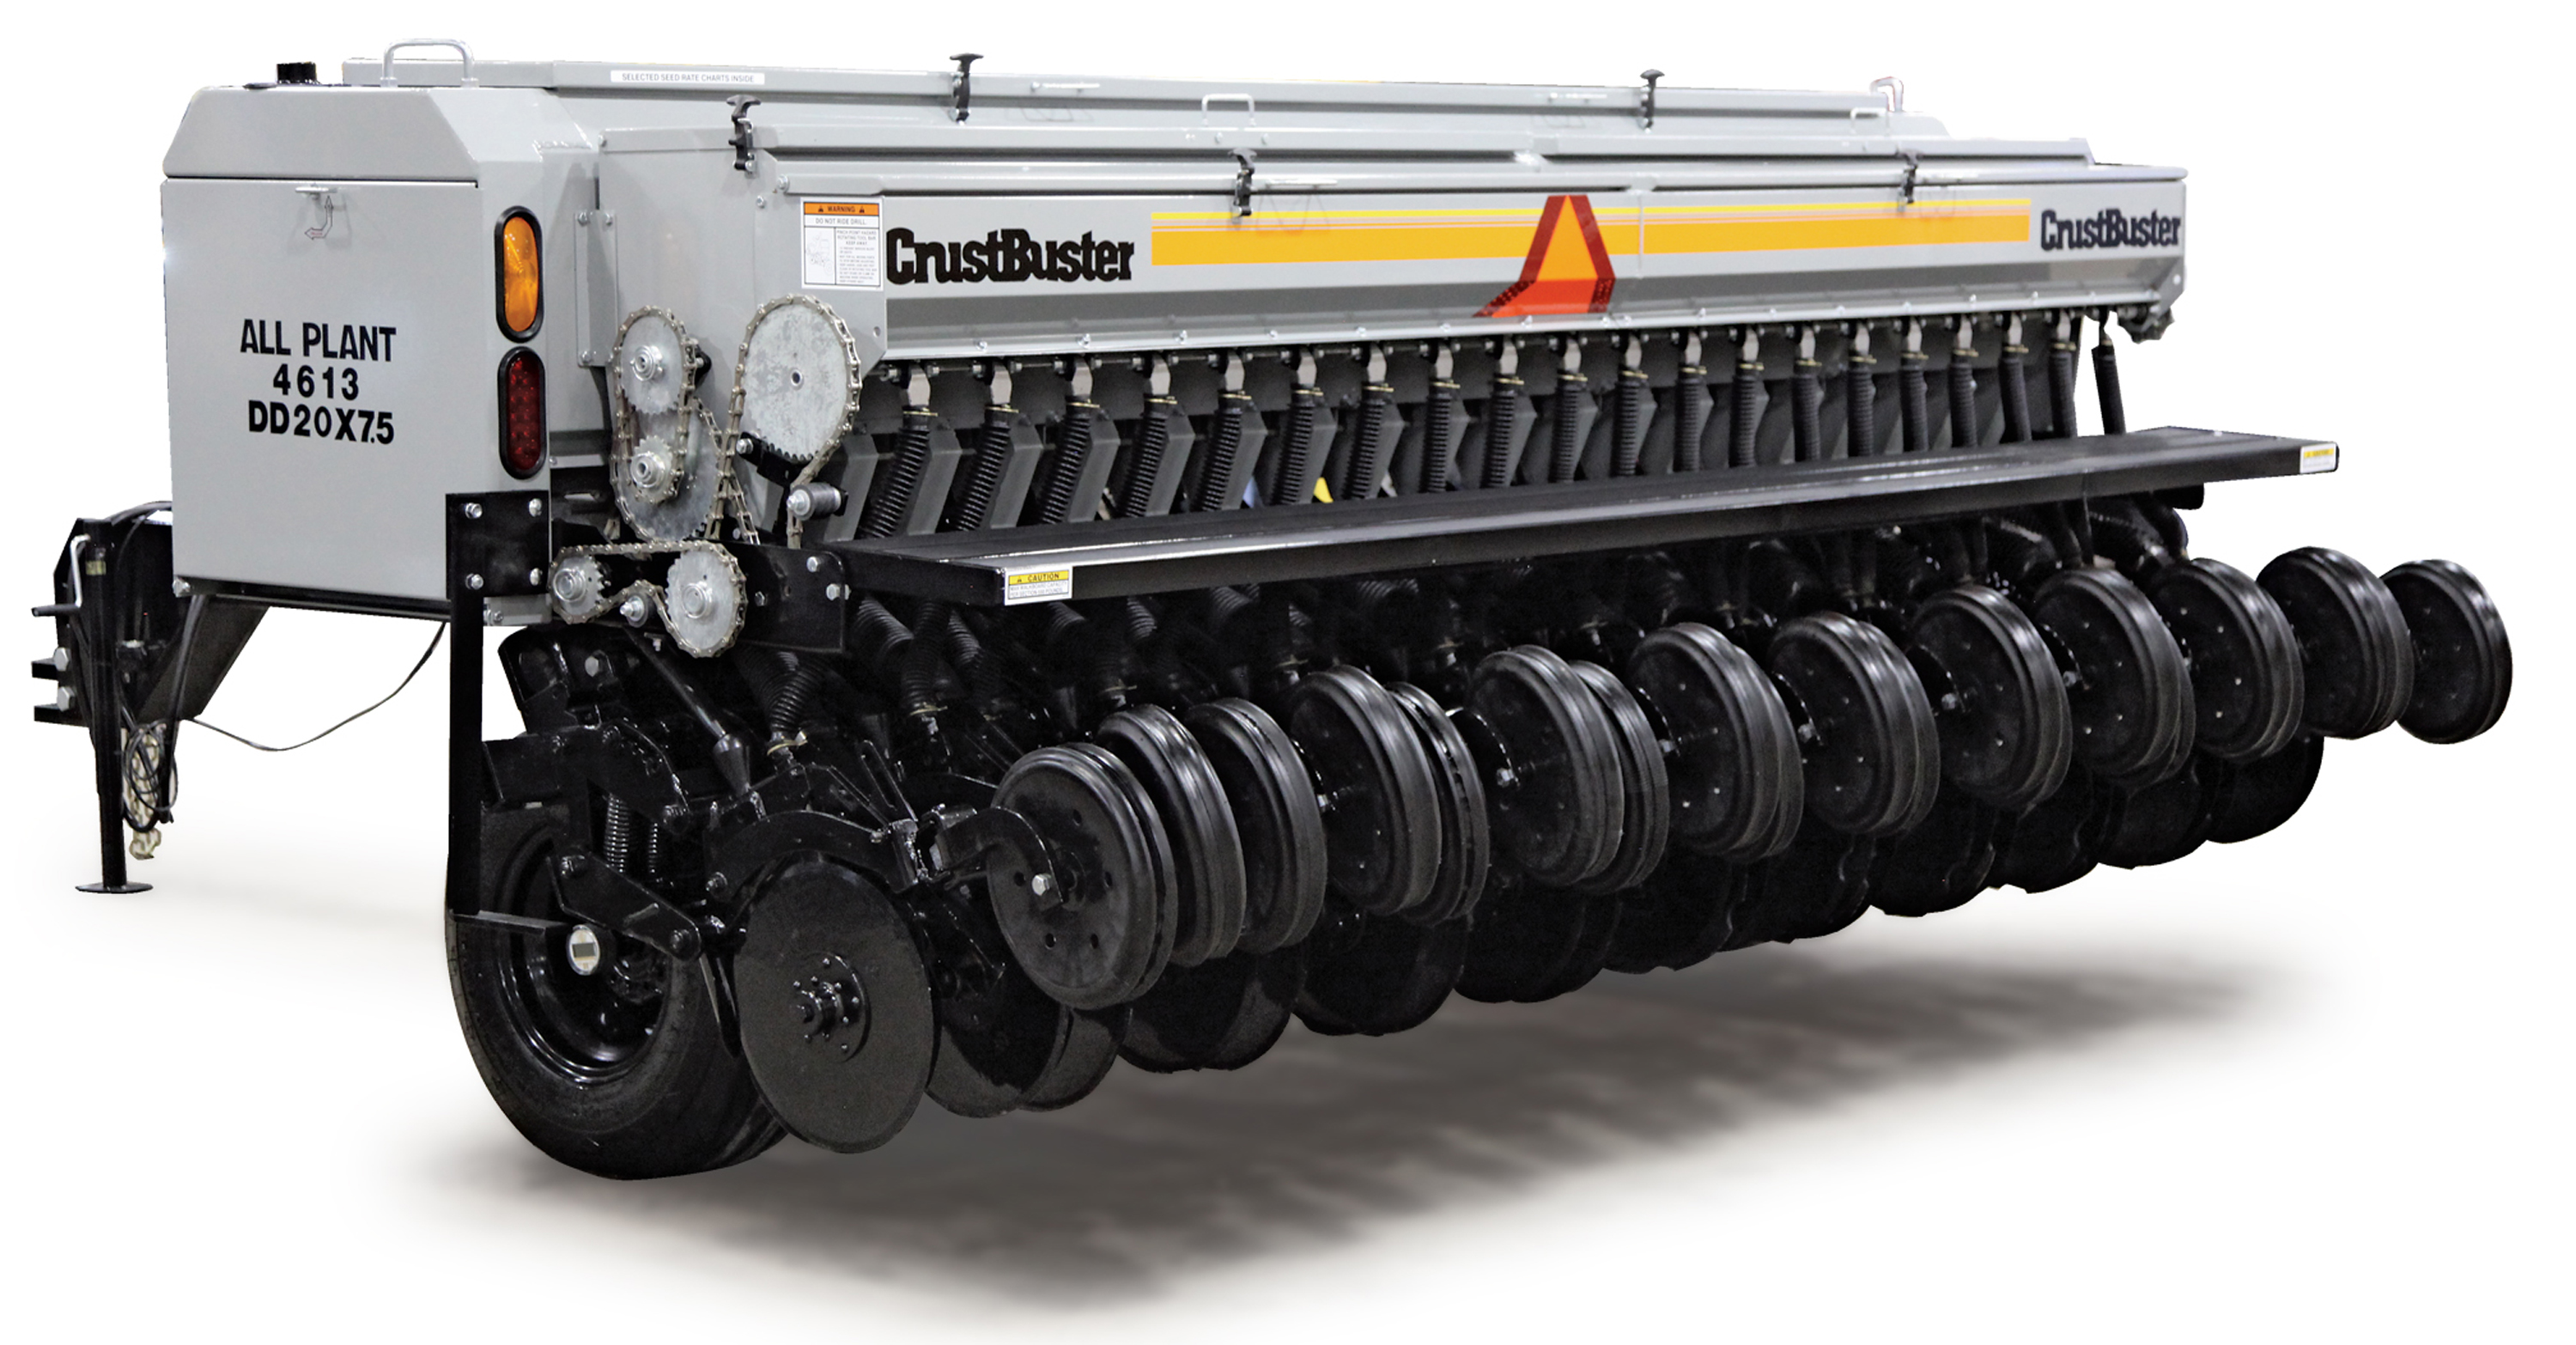 Crustbuster Releases New All Plant No Till Conservation Drill